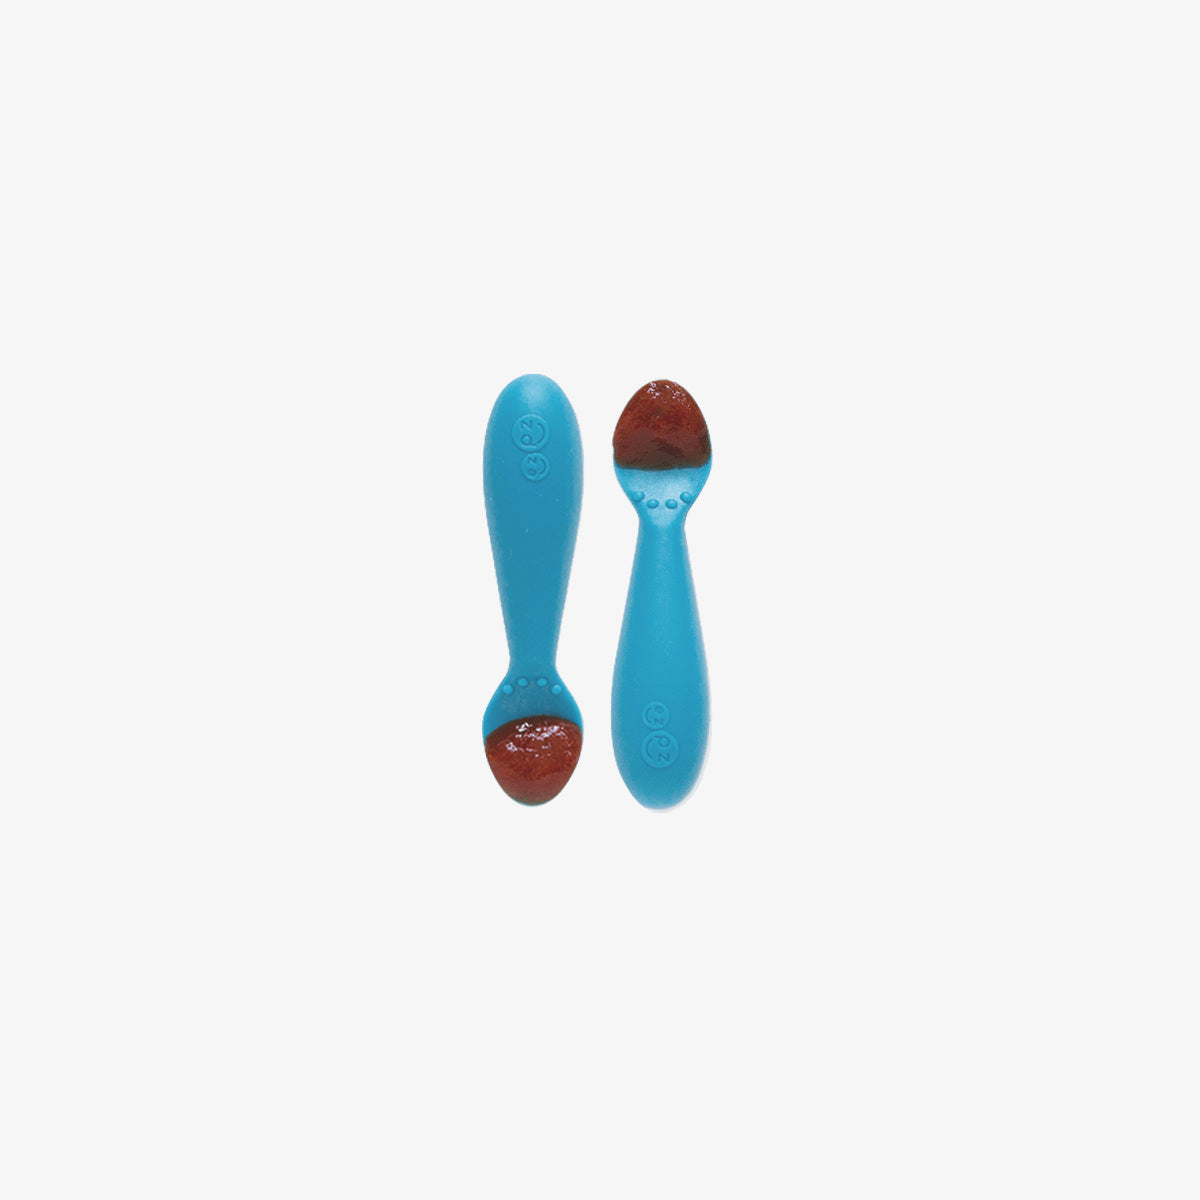  ezpz Tiny Spoon (2 Pack in Blue) - 100% Silicone